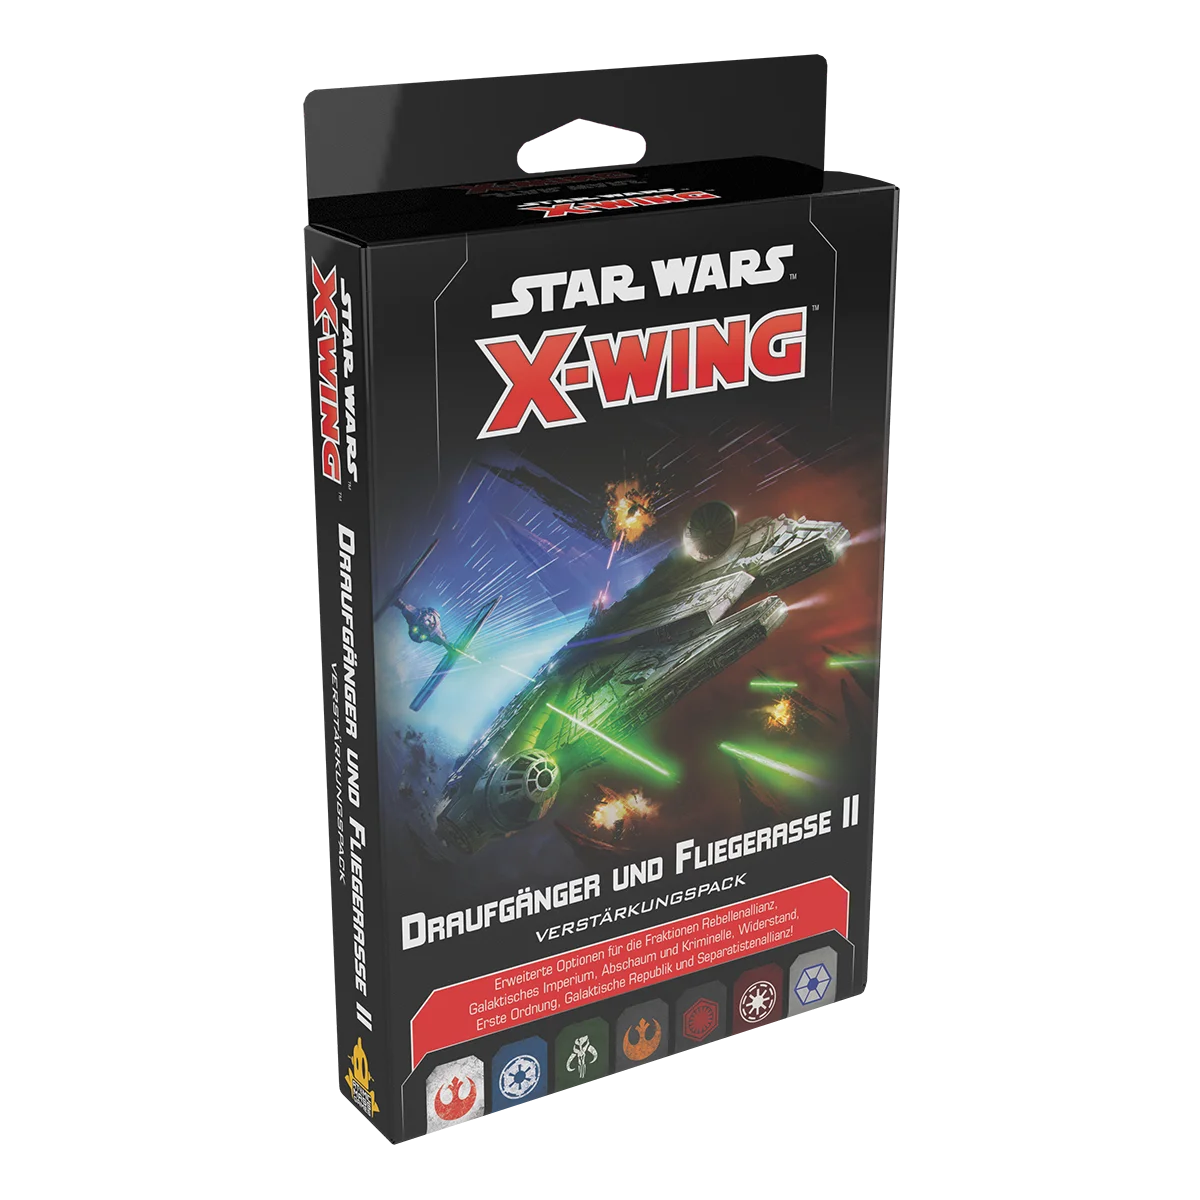 Star Wars: X-Wing 2nd Edition – Daredevil and Flying Ace II